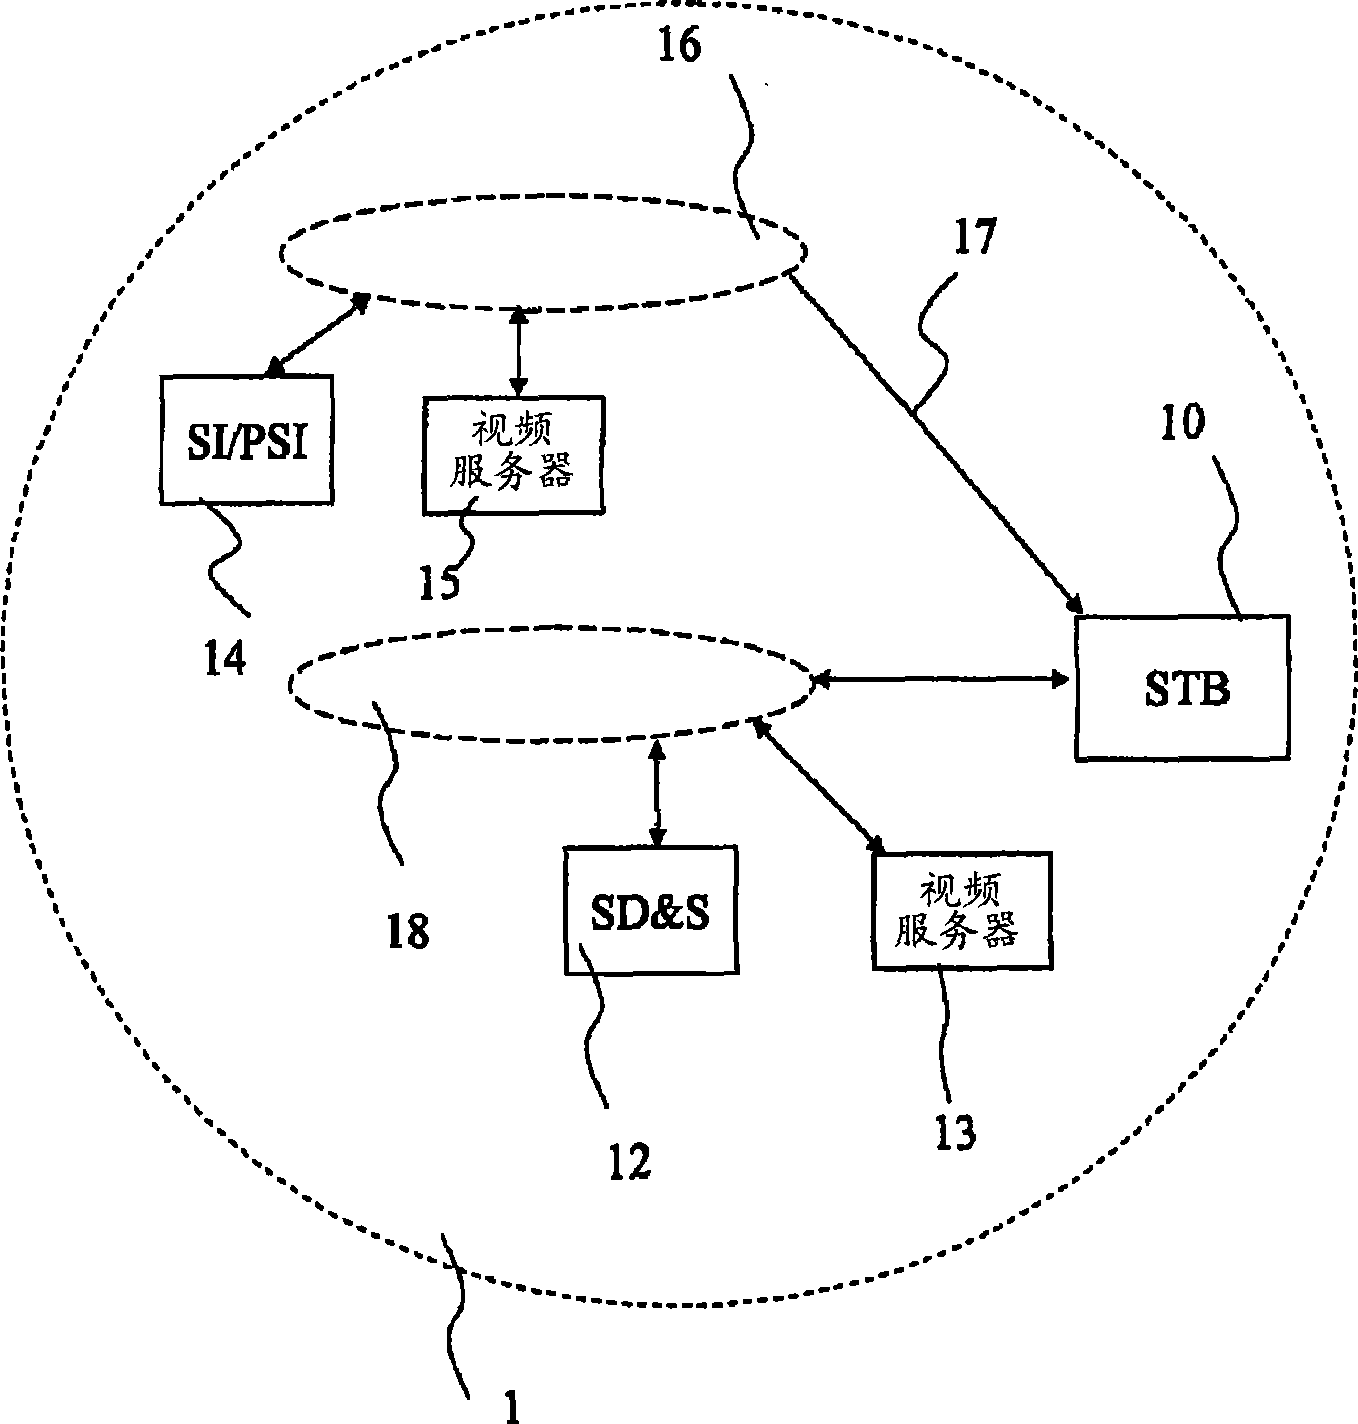 Methods of receiving and sending digital television services